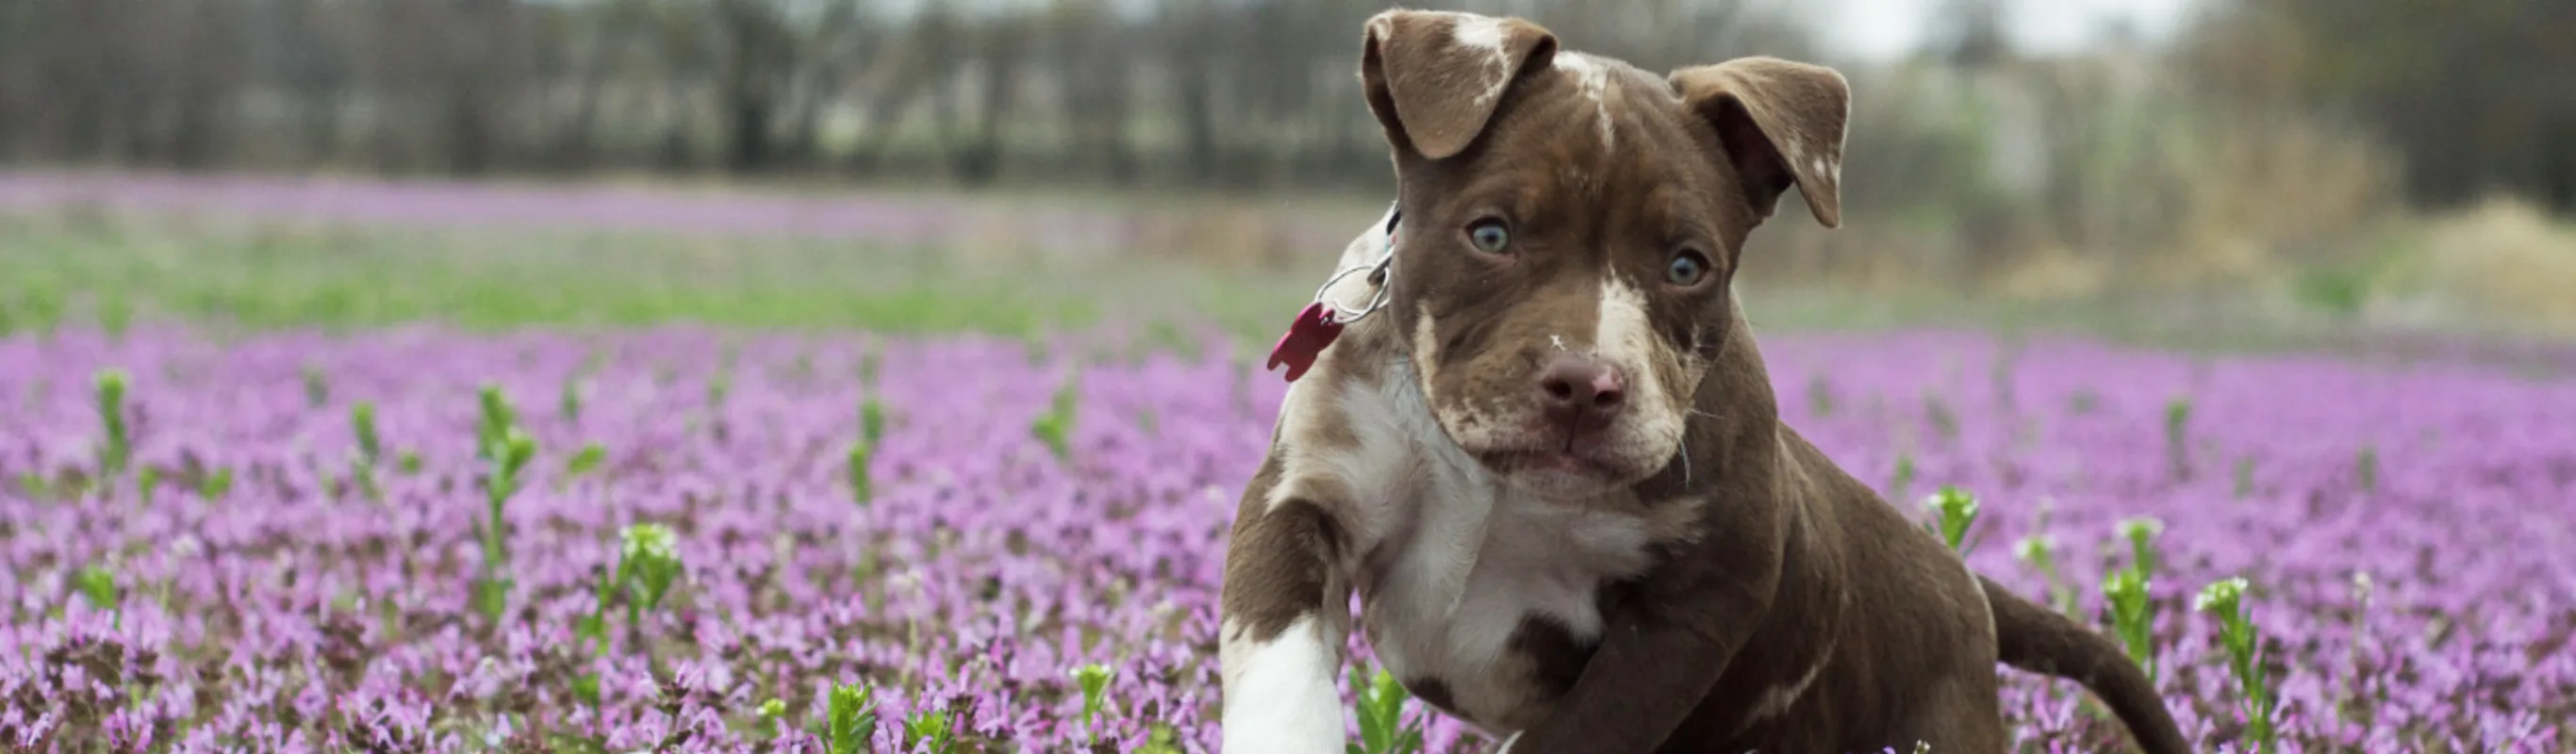 Brown and white puppy running through a field of purple flowers